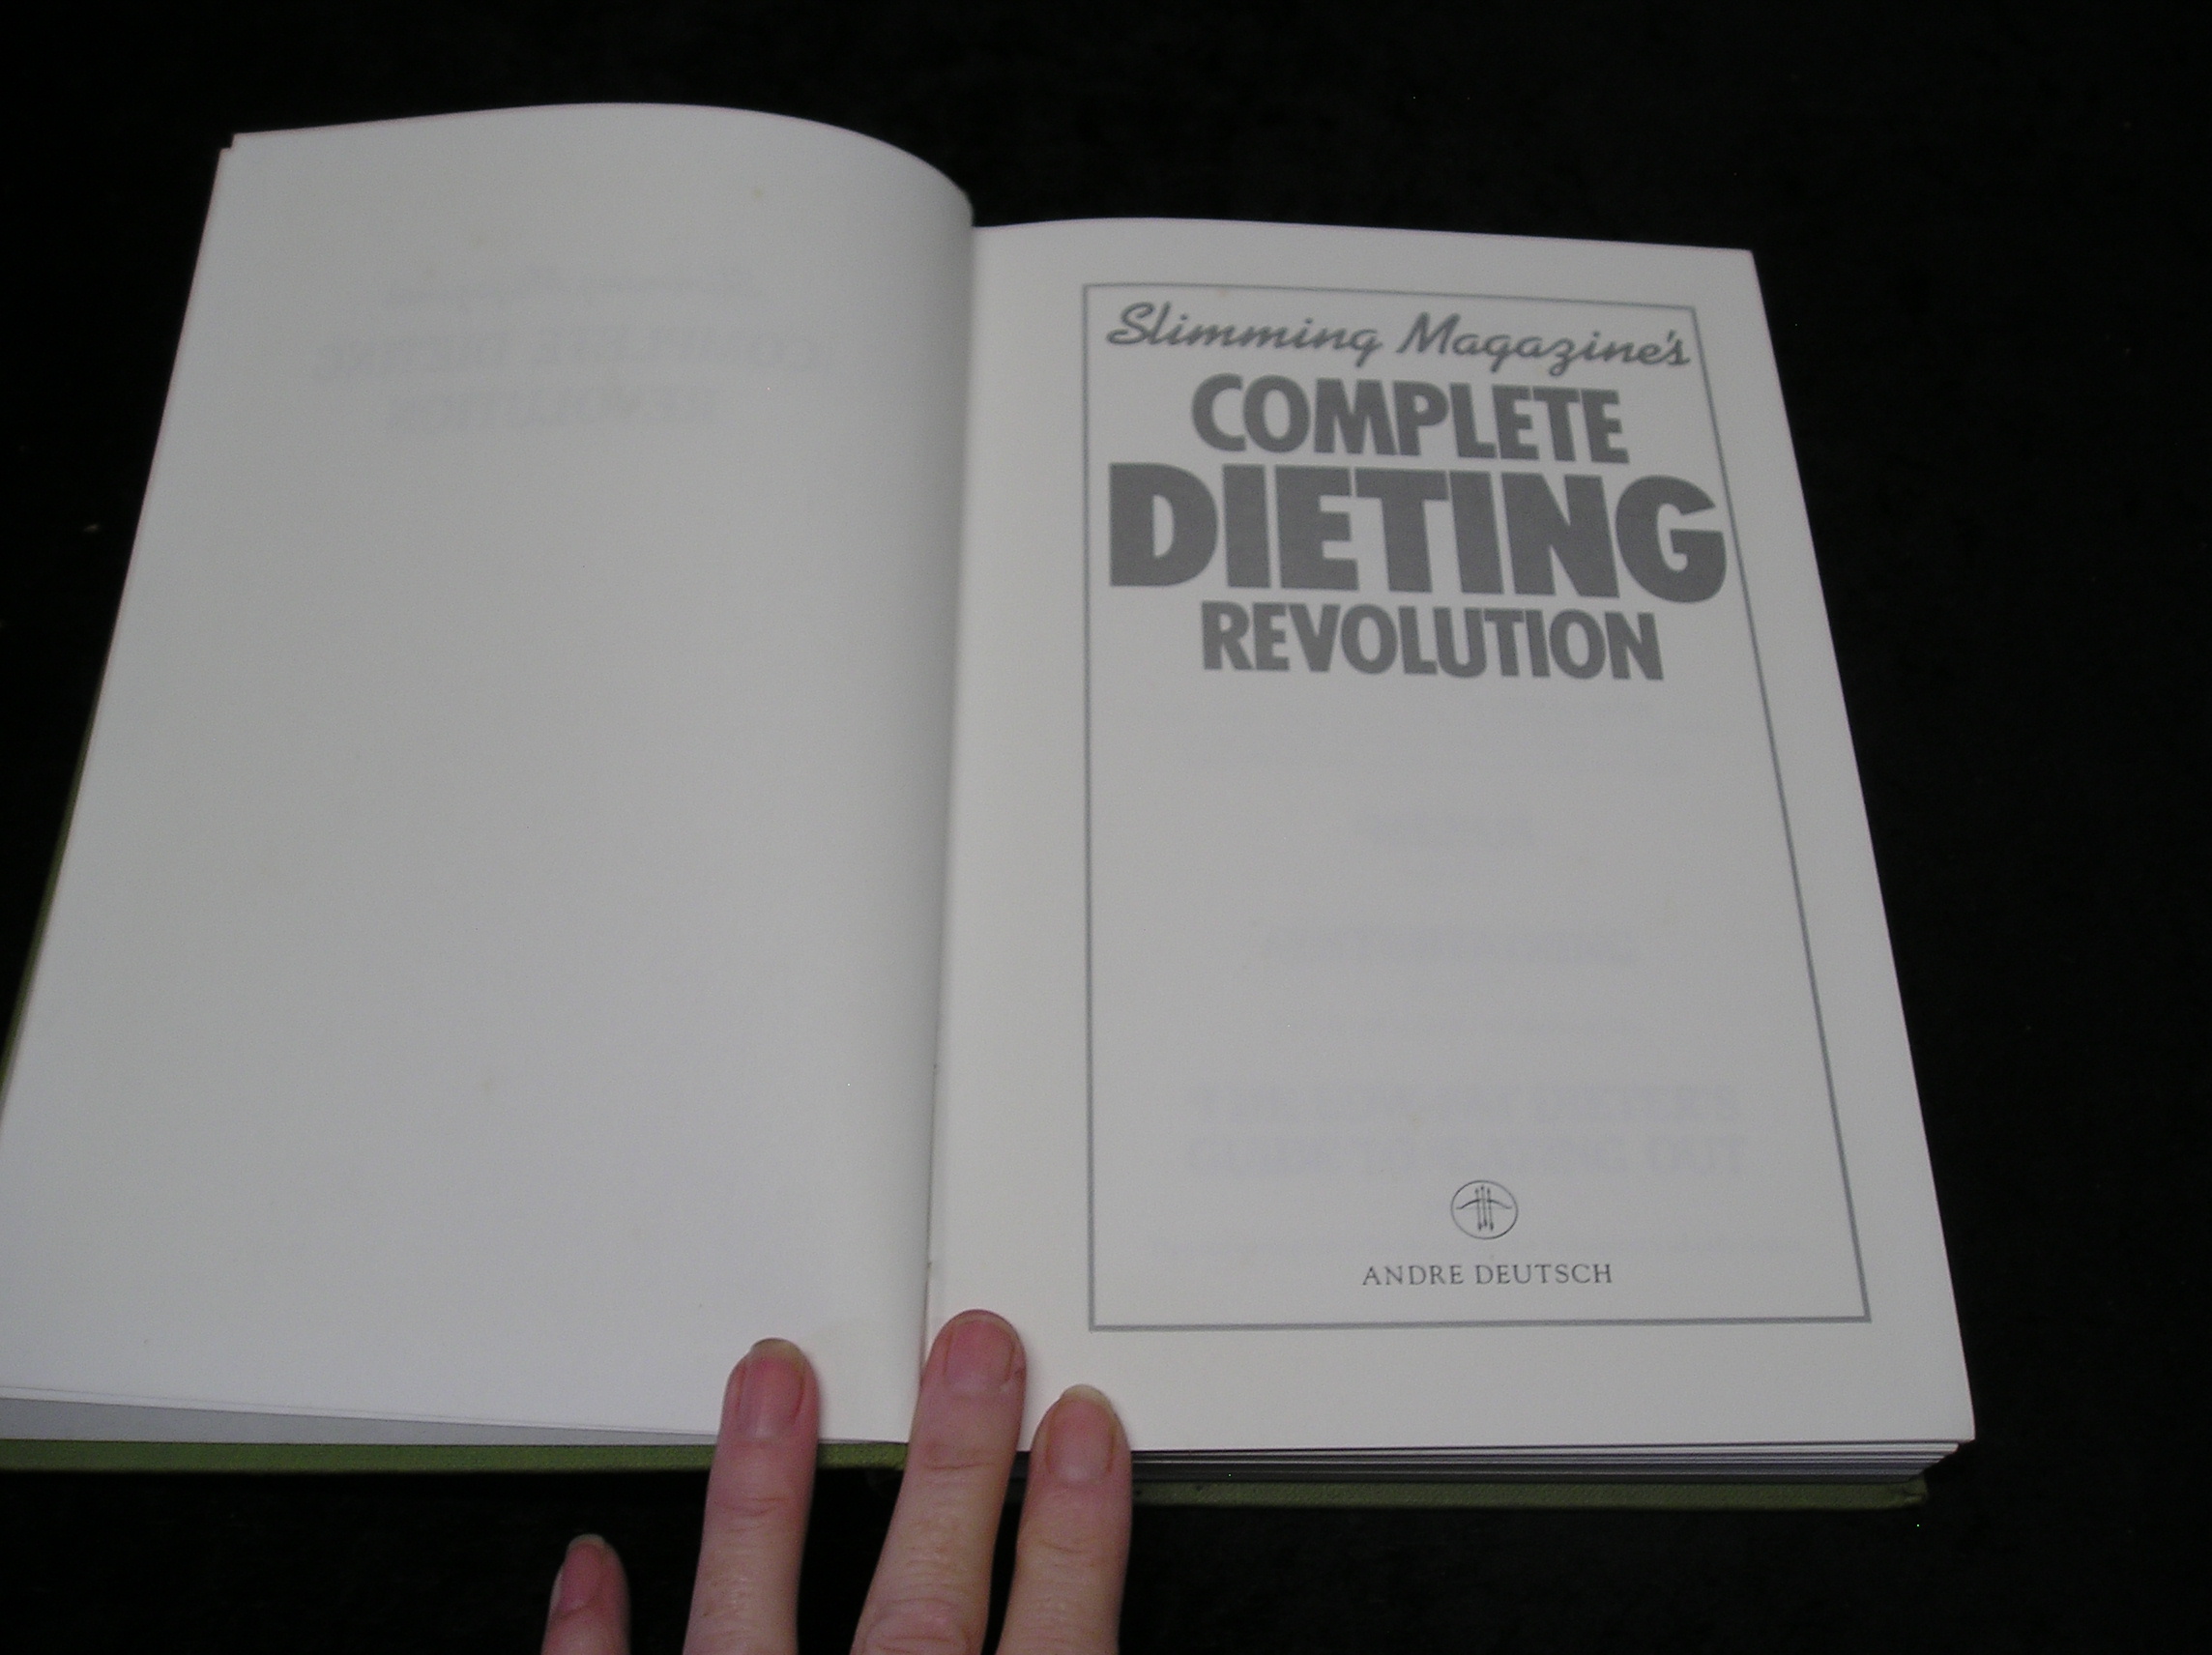 Image 0 of Slimming Magazine's Complete Dieting Revolution